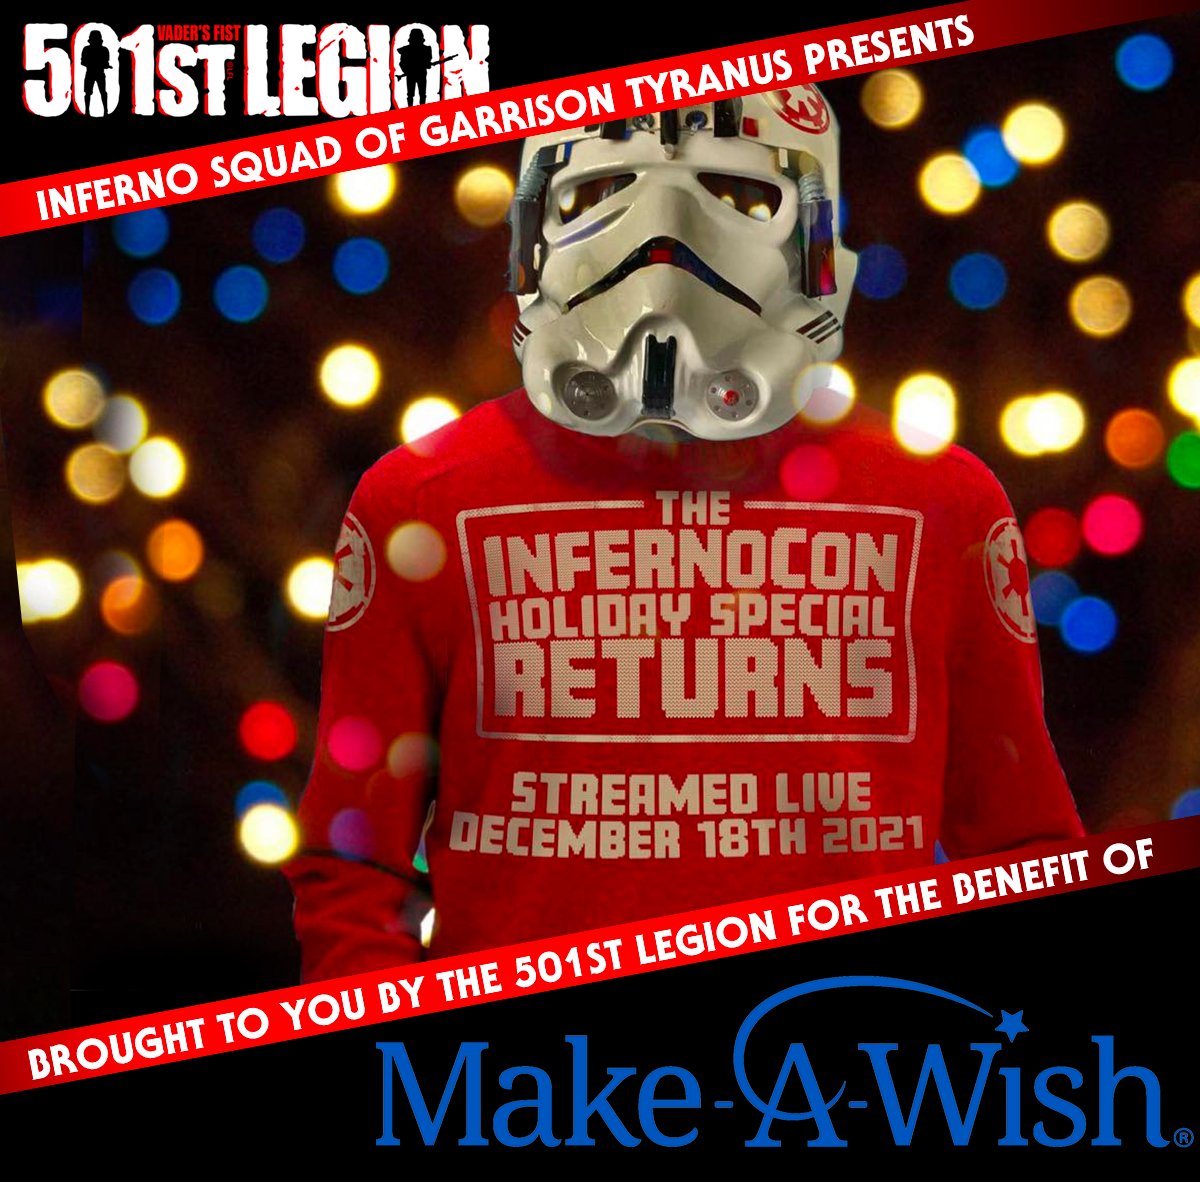 InfernoCon - The Holiday Special Returns!  Join us tomorrow morning, December 18th, at 9am EST.

inferno-con.com

@GarrisonTyranus @501InfernoSquad @MakeAWish @StreamForWishes #BadGuysDoingGood #HolidaySpecial